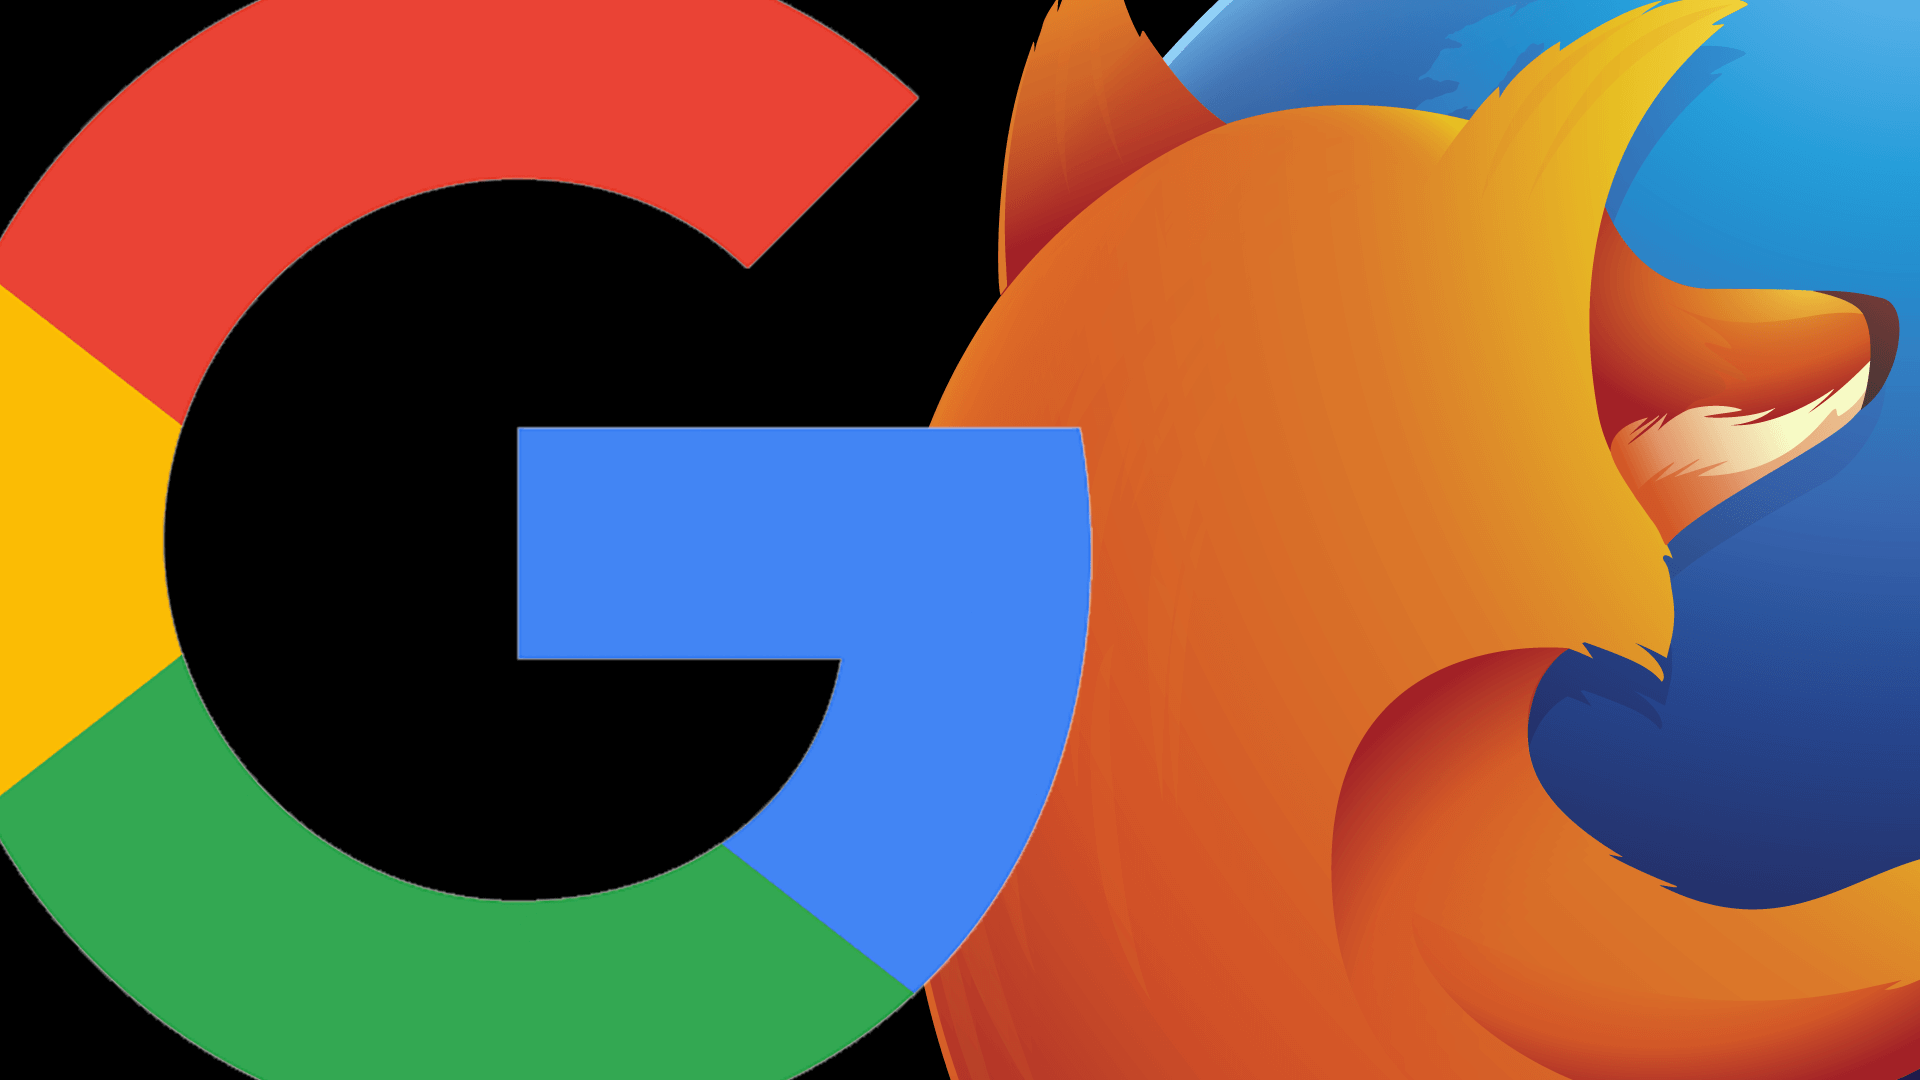 Google and Mozilla Extend Firefox Search Deal by a Further 3 Years